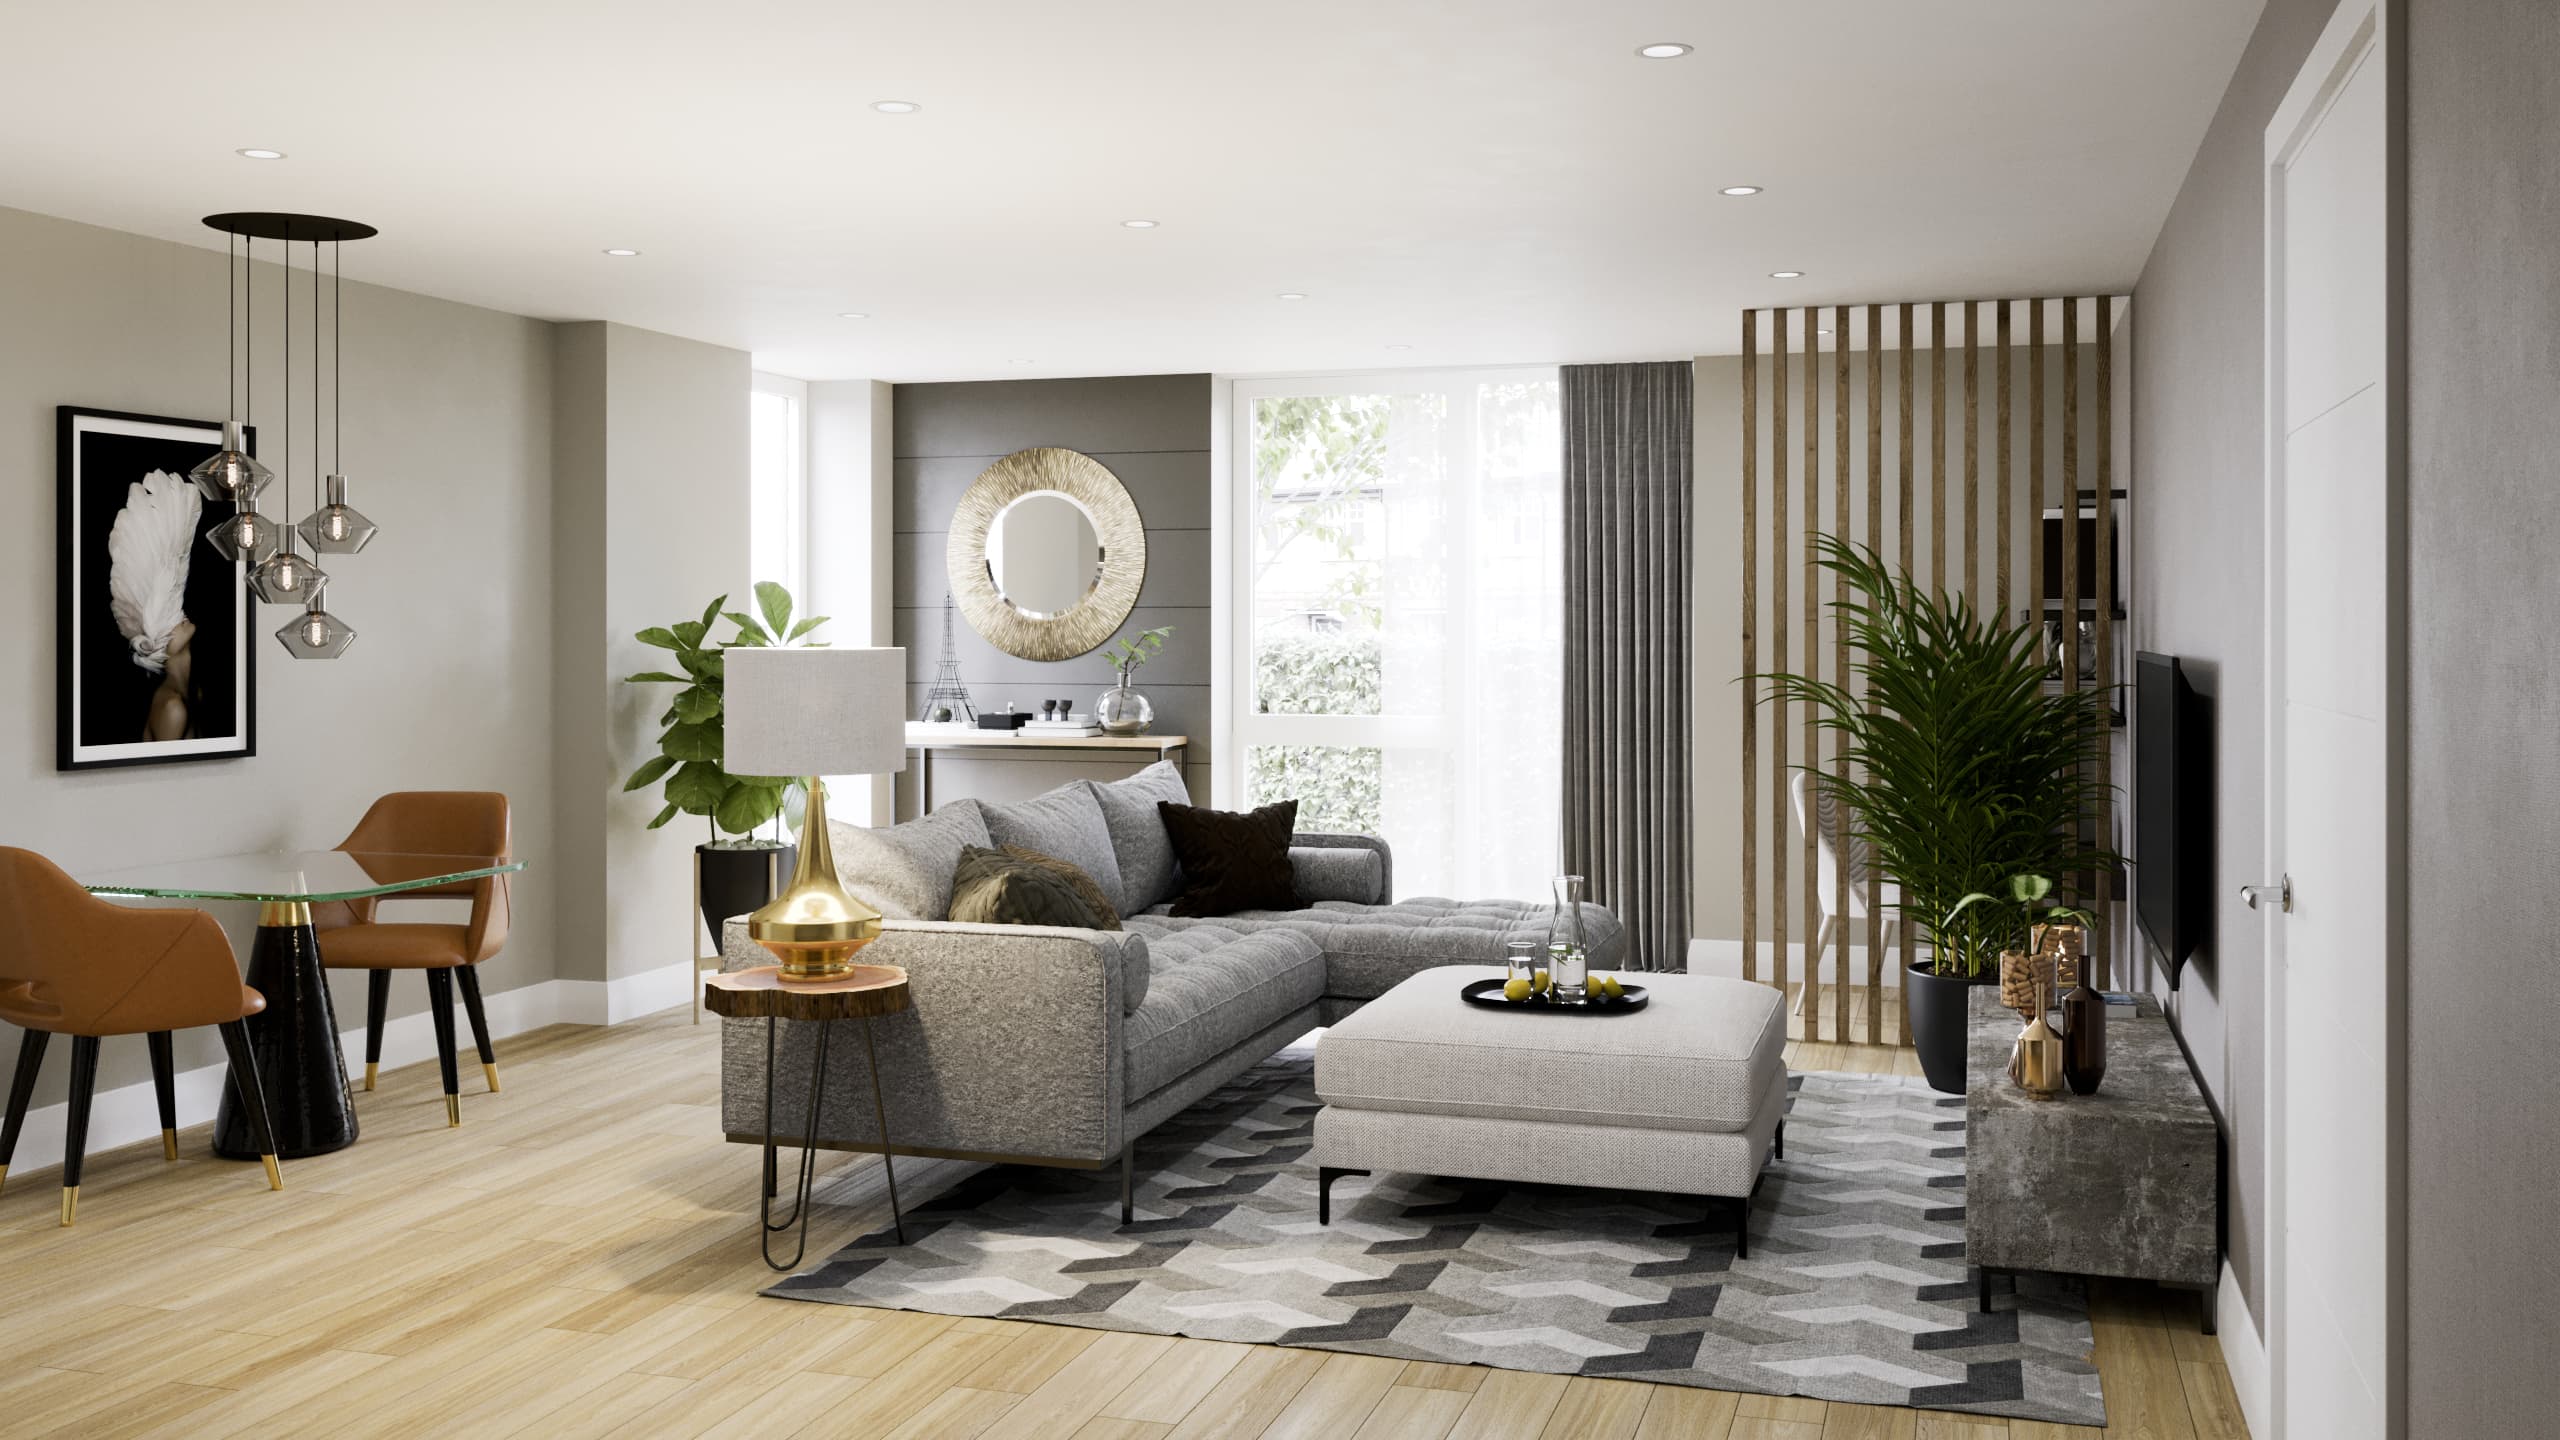 Show home photography of a living room at Catalyst's The Folium - Shared Ownership homes available on Share to Buy